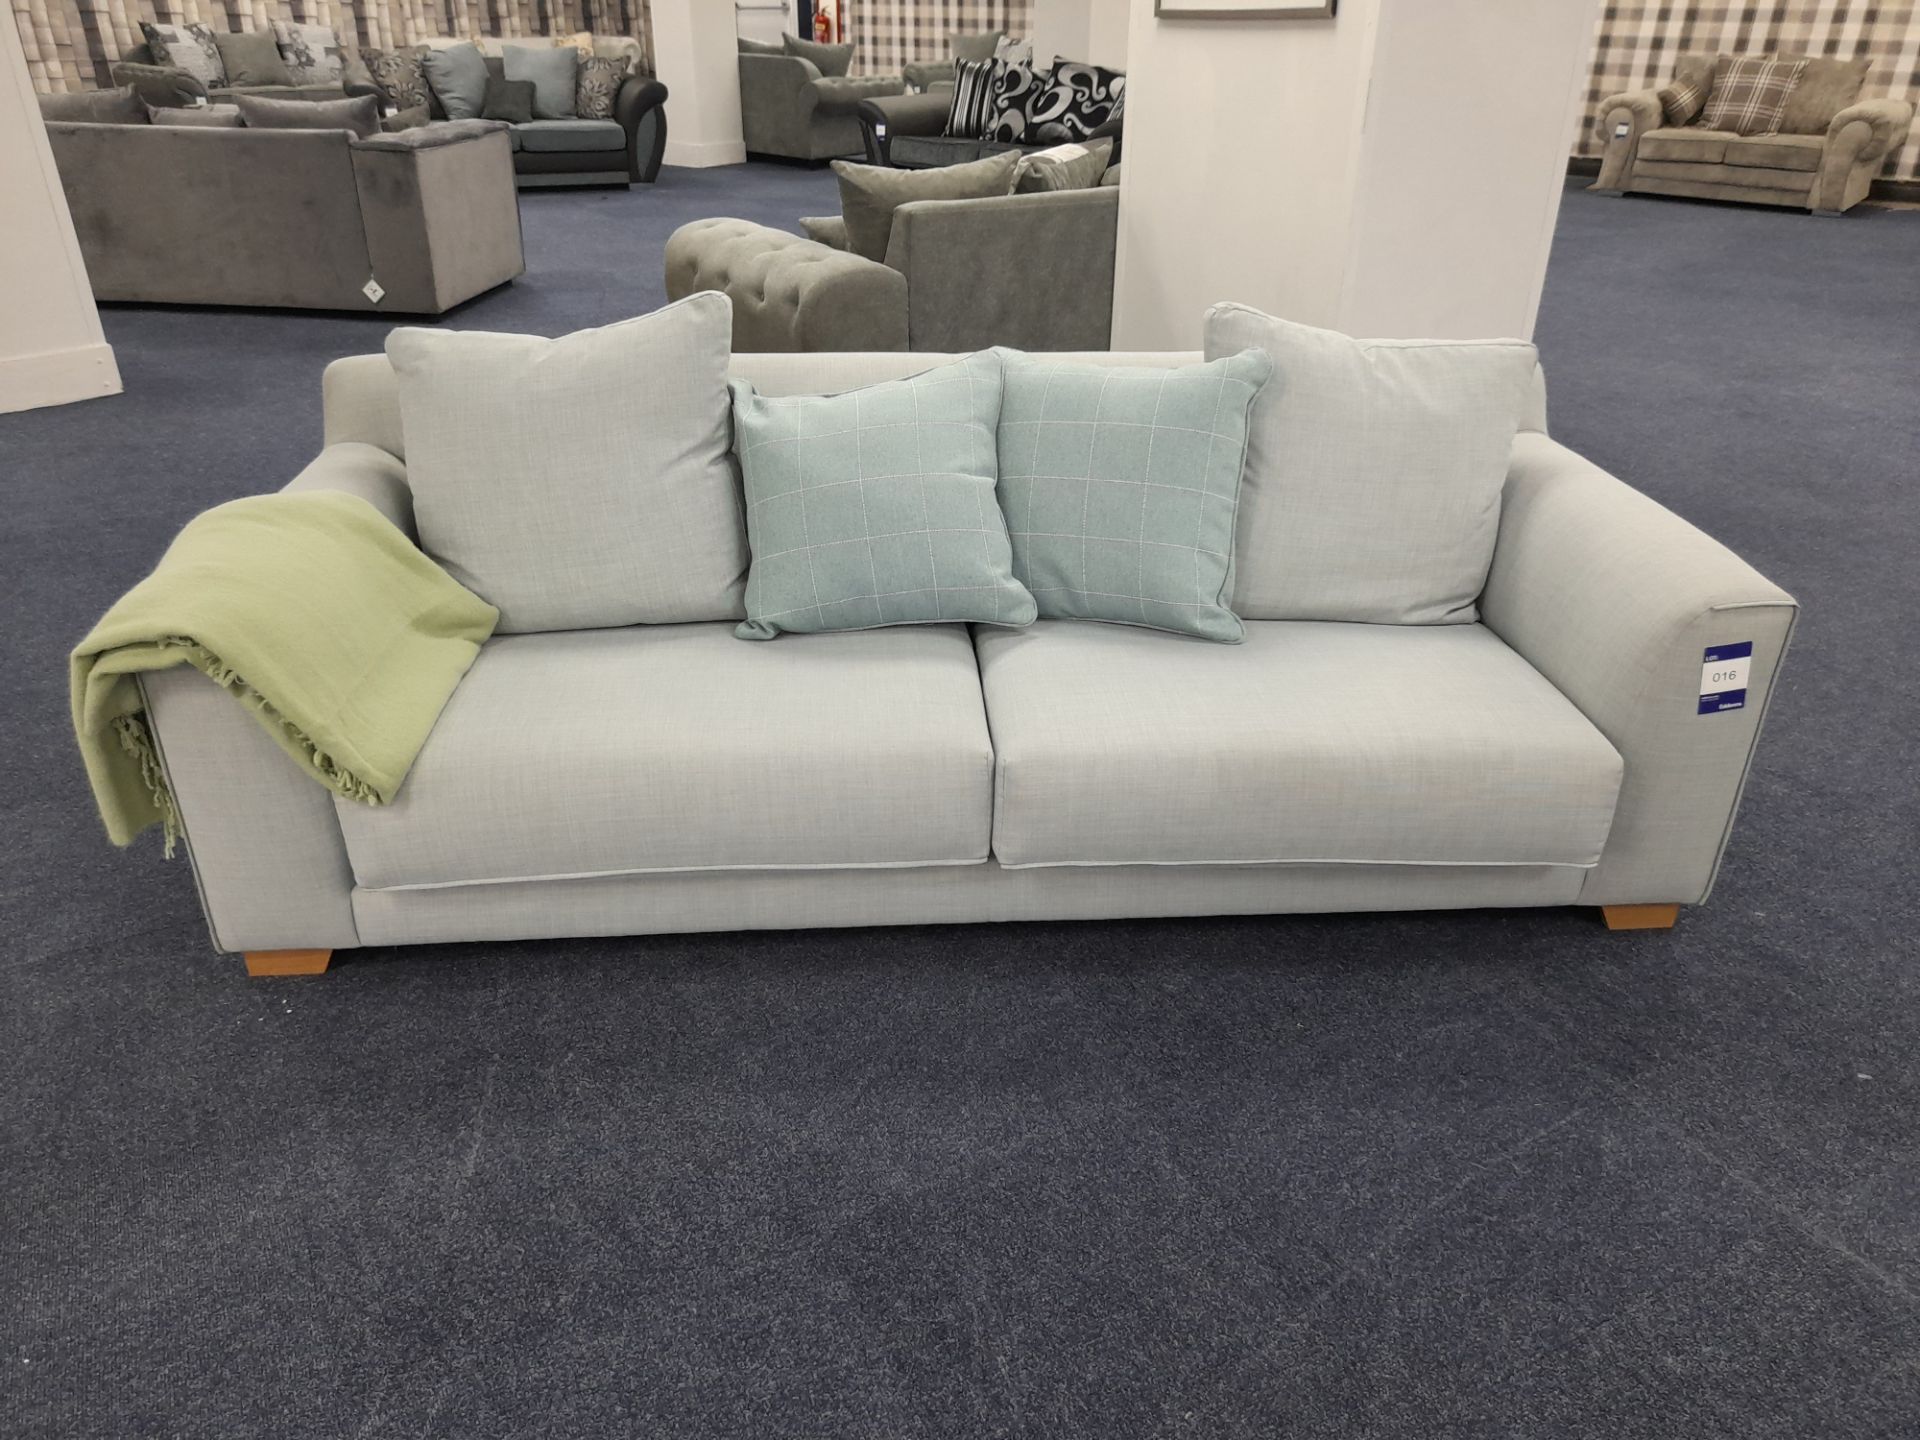 John Lewis pale blue fabric upholstered, 4 seater sofa (Ex-Display) - Image 8 of 8